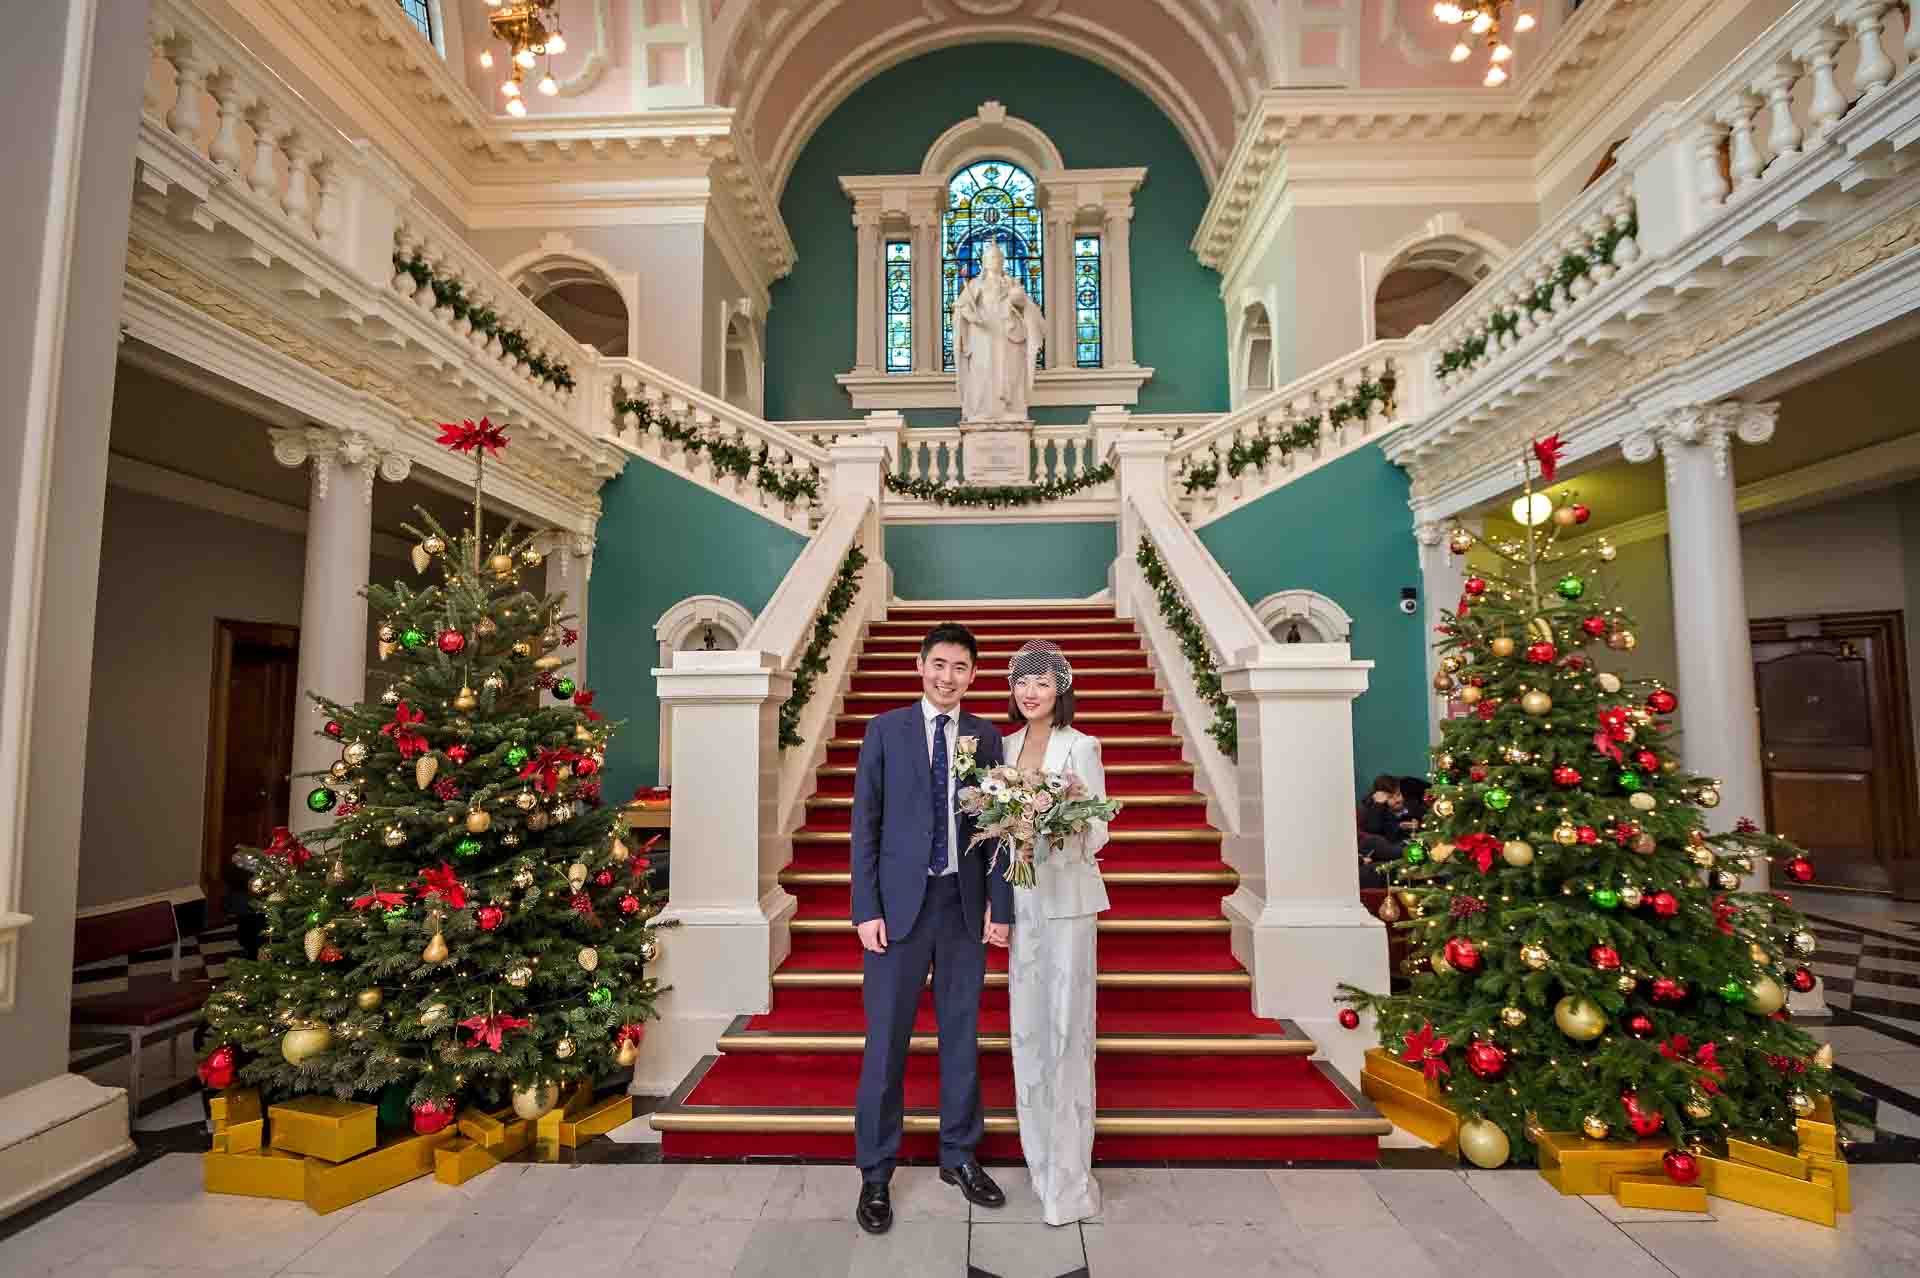 The newly-weds pose in the Victorian Hall after their Woolwich Town Hall Wedding at Christmas time